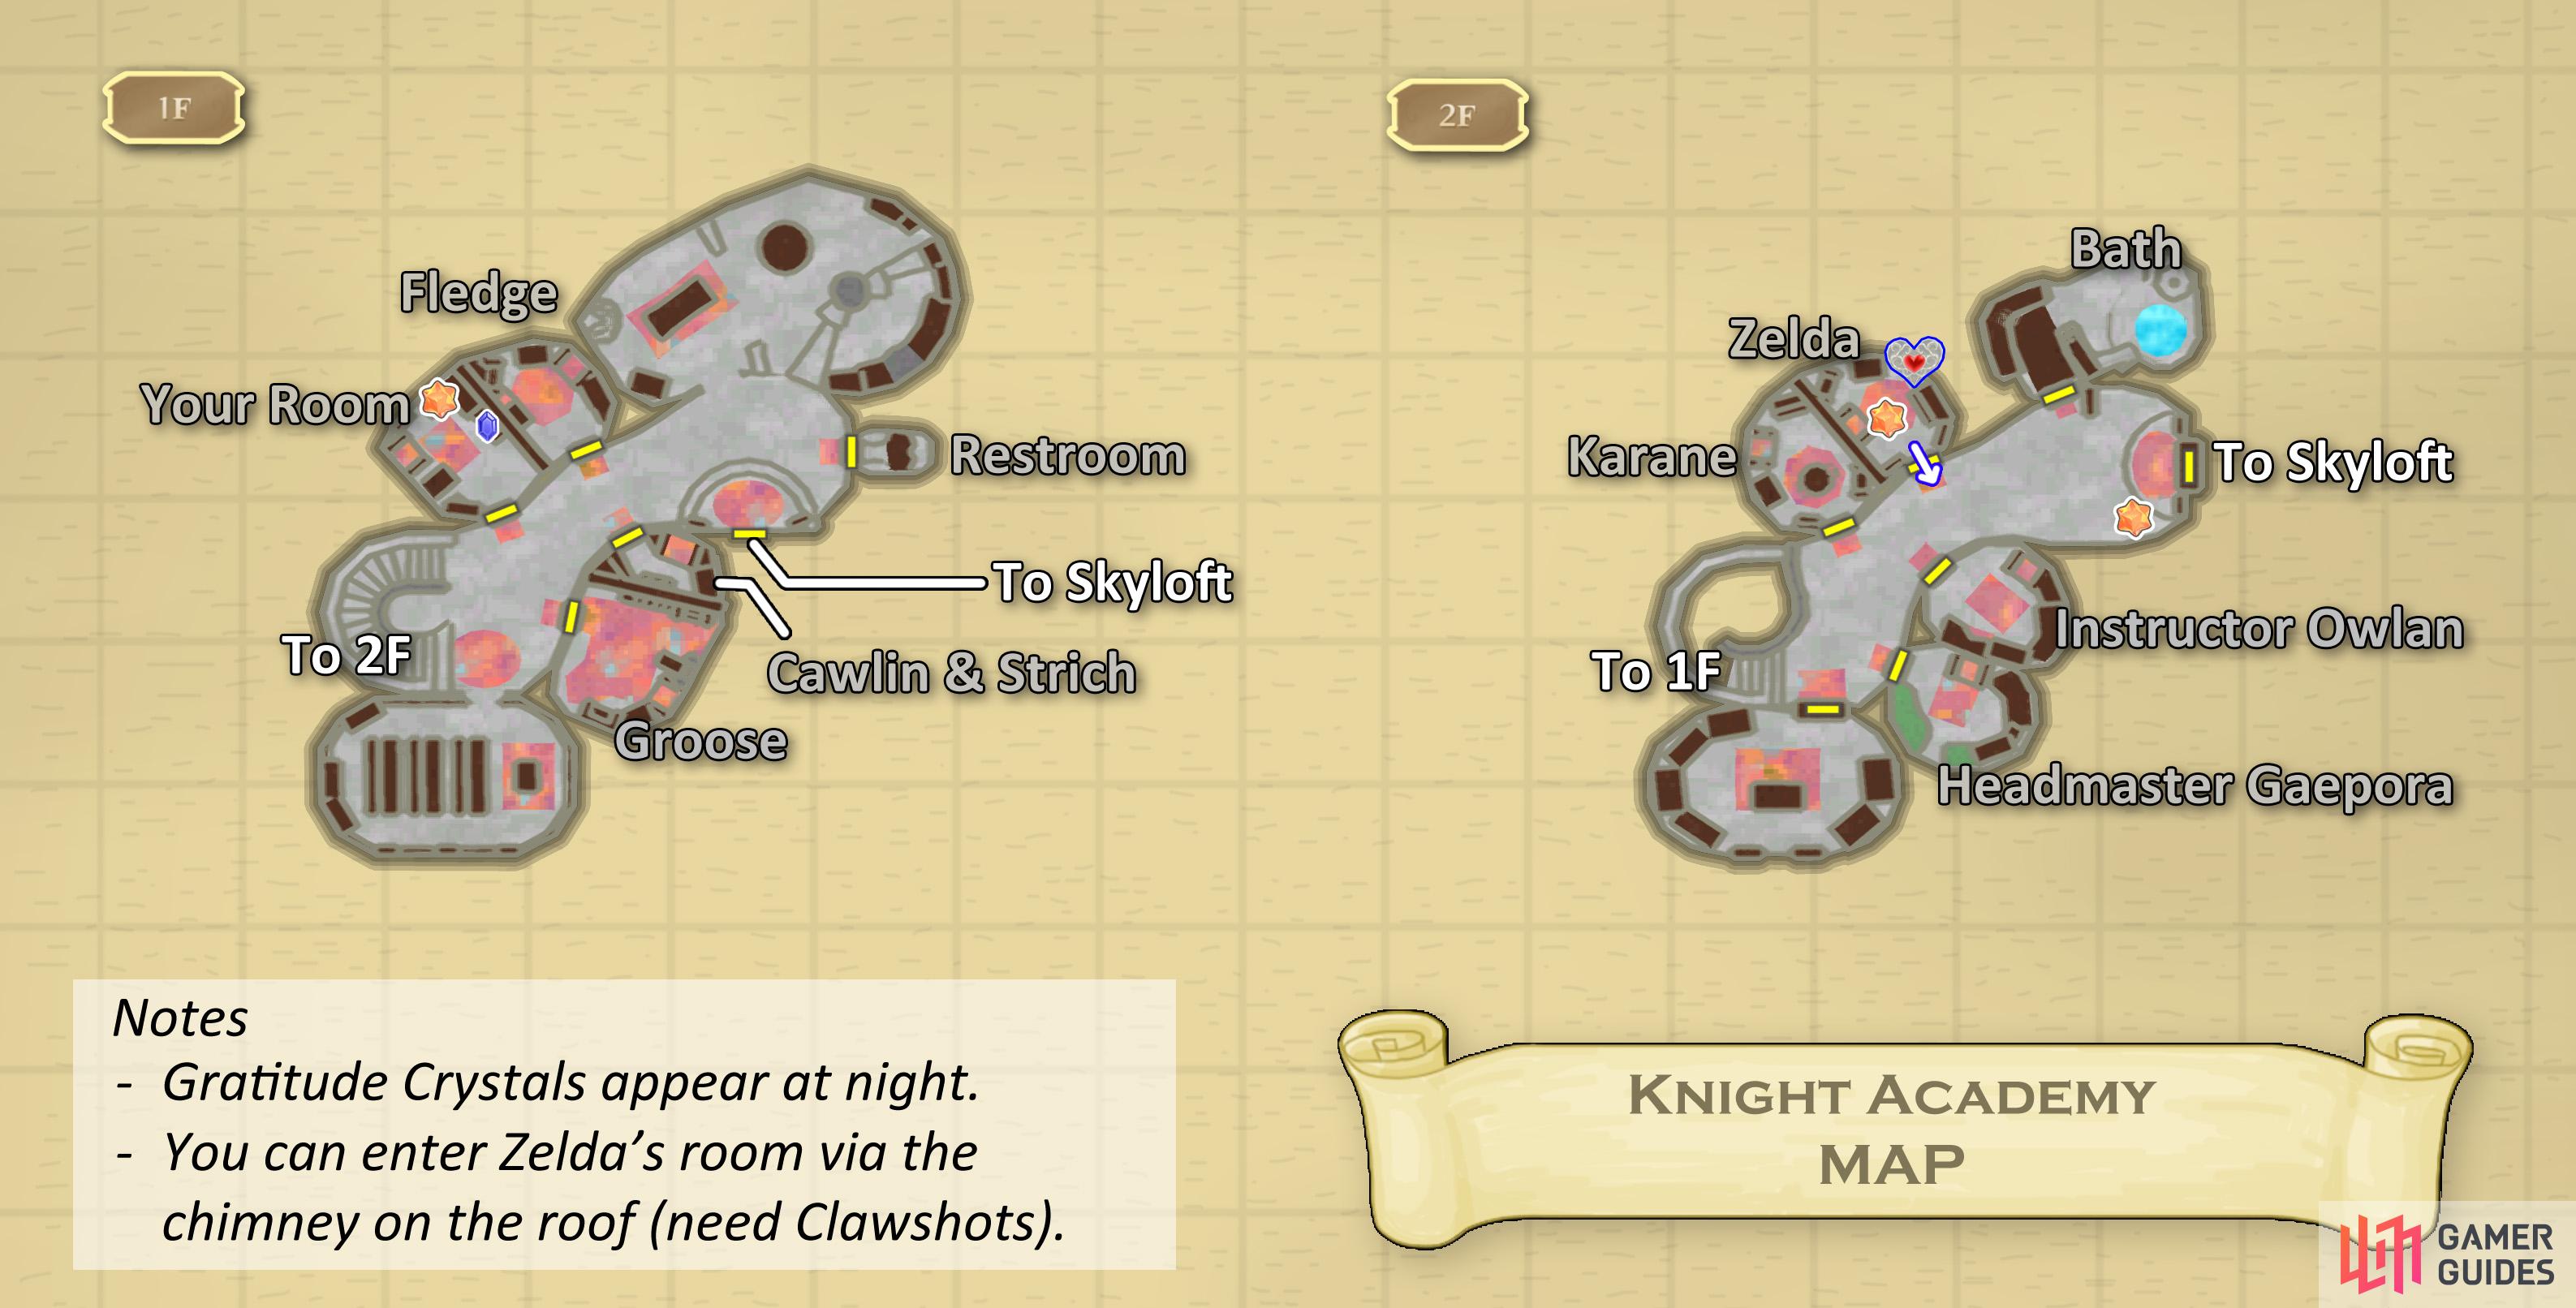 Map of the Knight Academy.